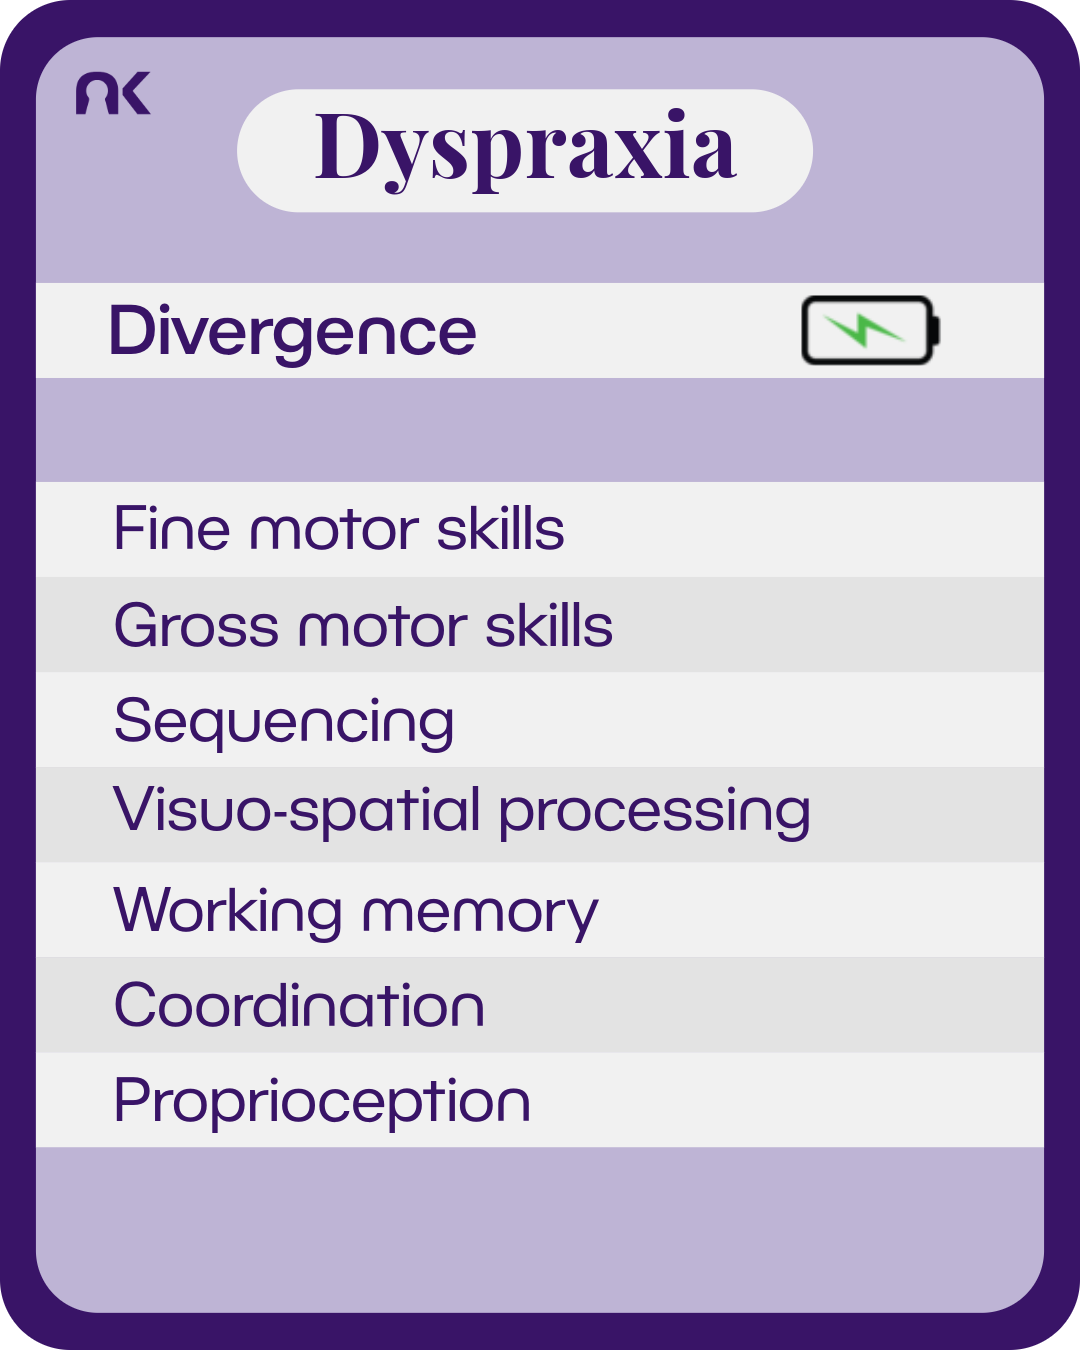 An information card made to look like it is from a card game. Next to the subtitle "divergence" is a battery with an electric bolt inside it. Text says: "Dyspraxia. Divergence. Fine motor skills; Gross motor skills; Sequencing; Visuo-spatial processing; Working memory; Coordination; Proprioception."